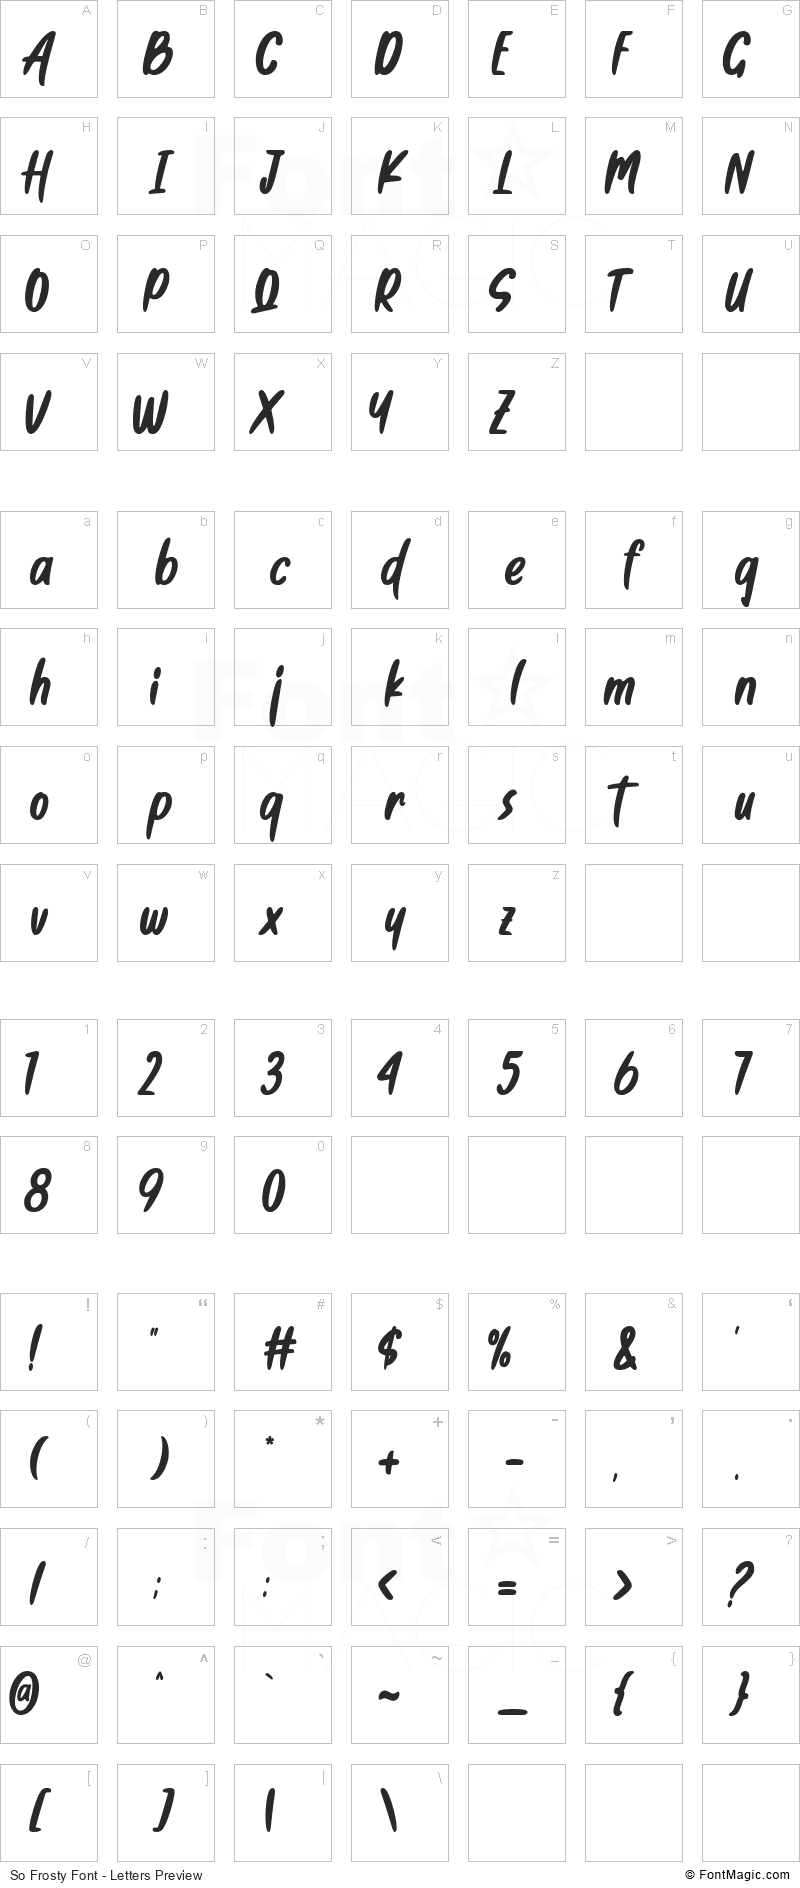 So Frosty Font - All Latters Preview Chart